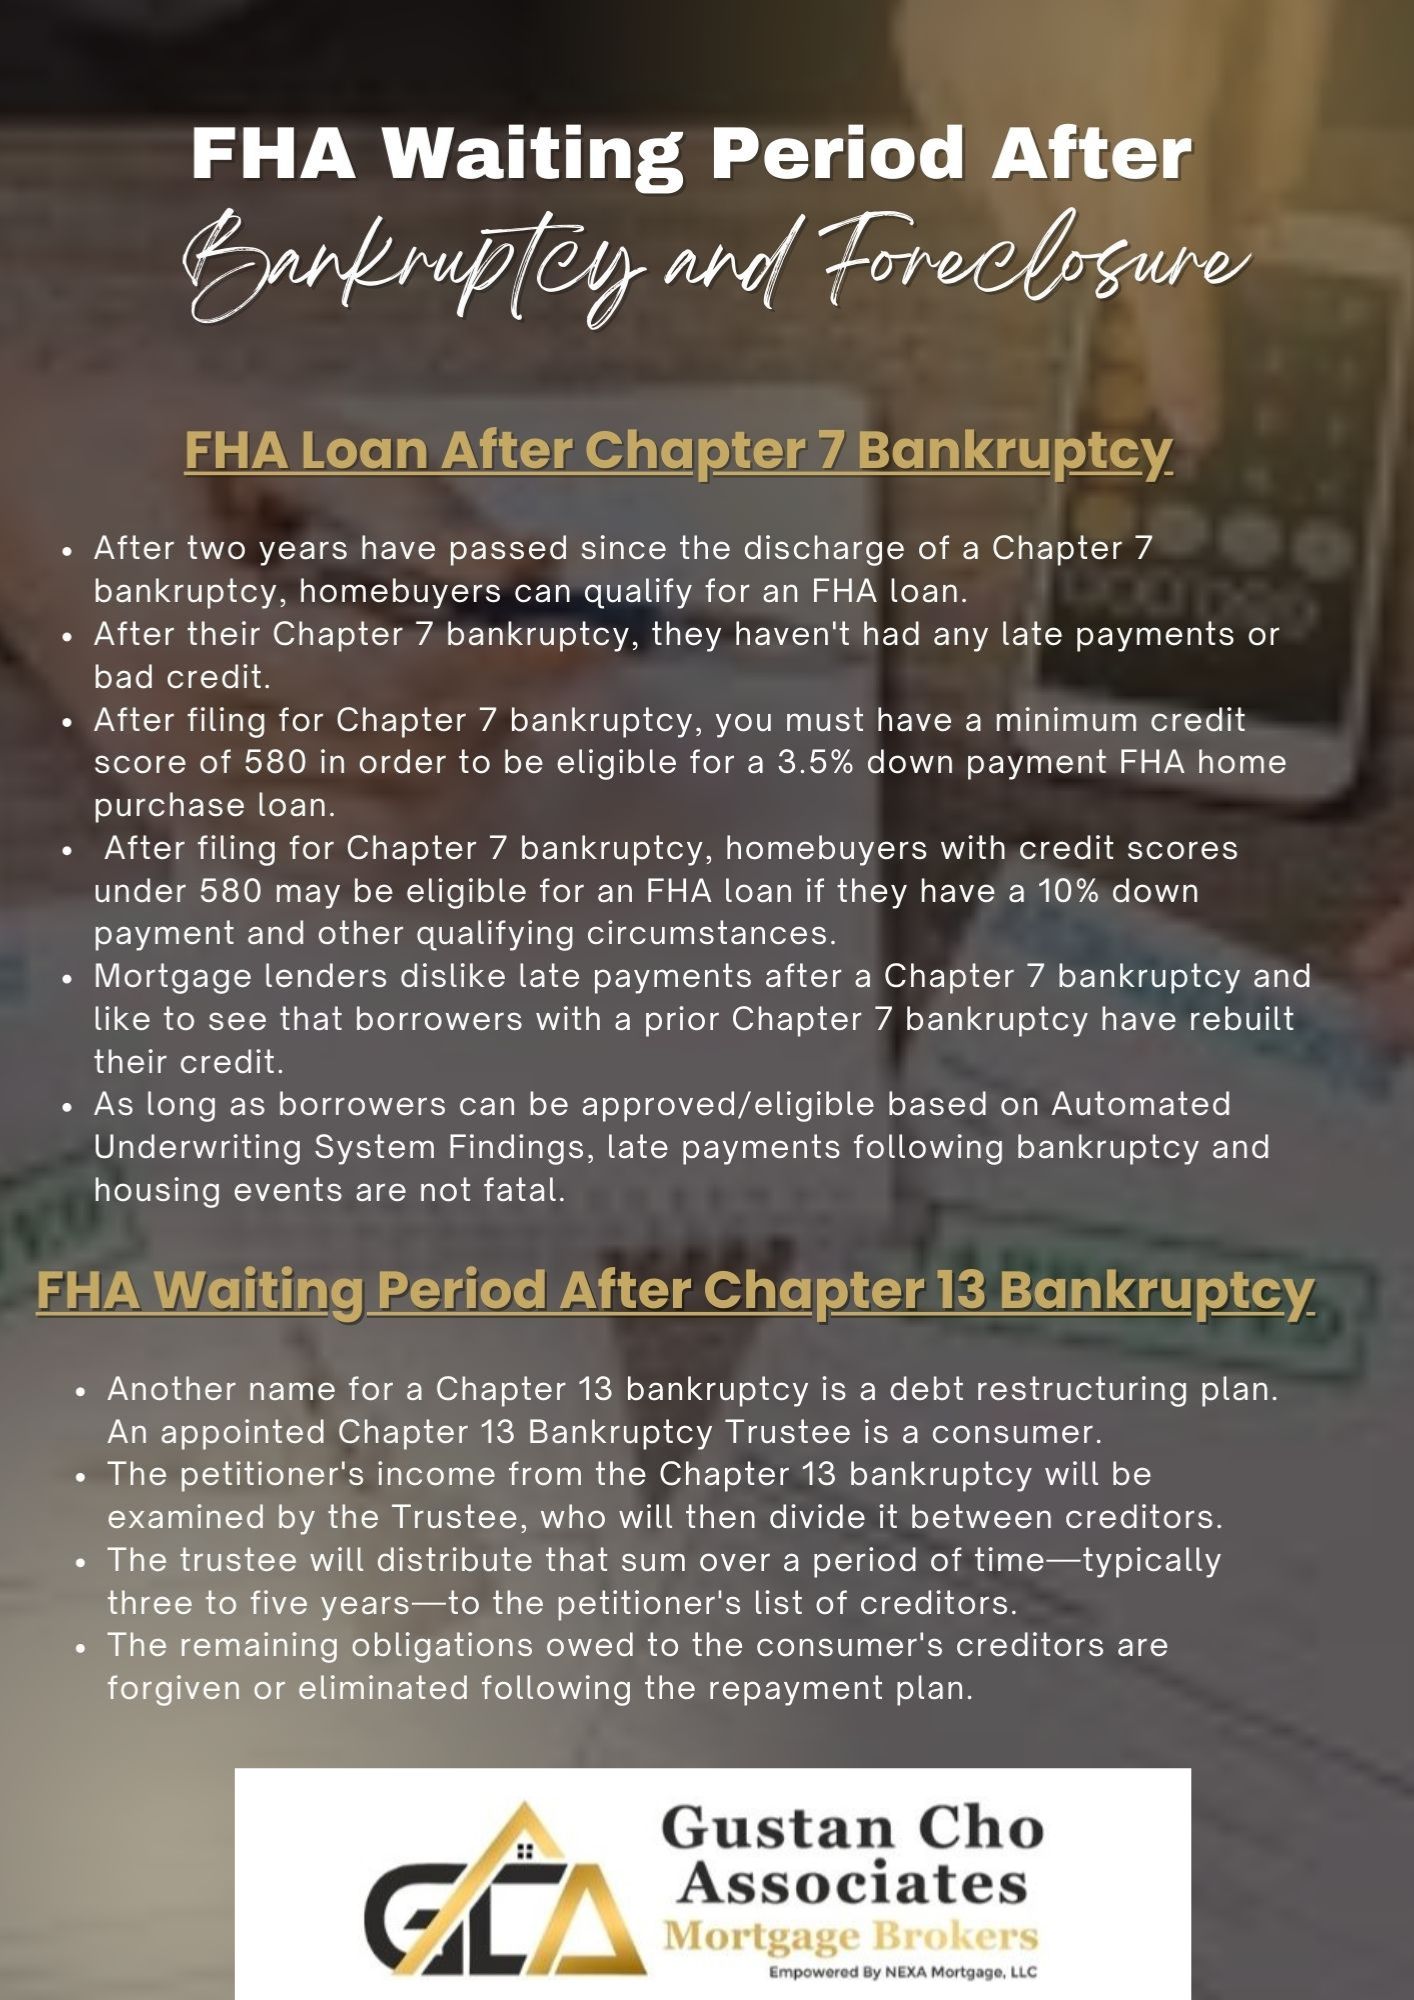 FHA Waiting Period After Chapter 13 Bankruptcy